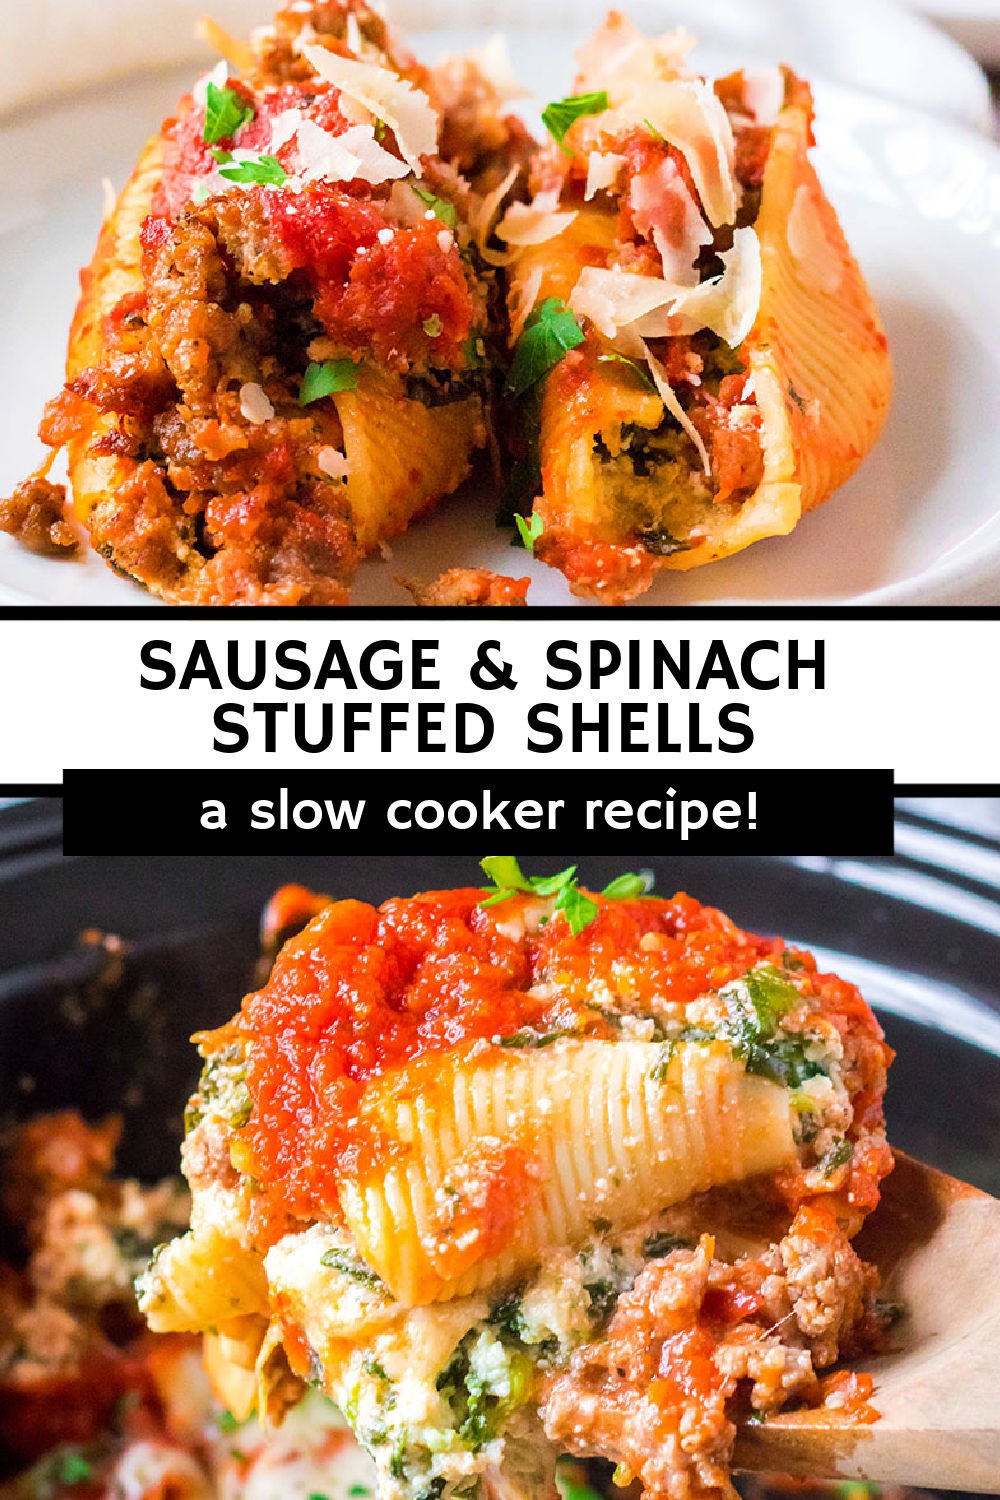 Slow Cooker Stuffed Shells with Sausage and Spinach is an easy crockpot meal. Jumbo shells filled with a cheesy spinach mixture and then topped with a browned sausage (or ground beef!) sauce is an easy, comforting family favorite. | www.persnicketyplates.com